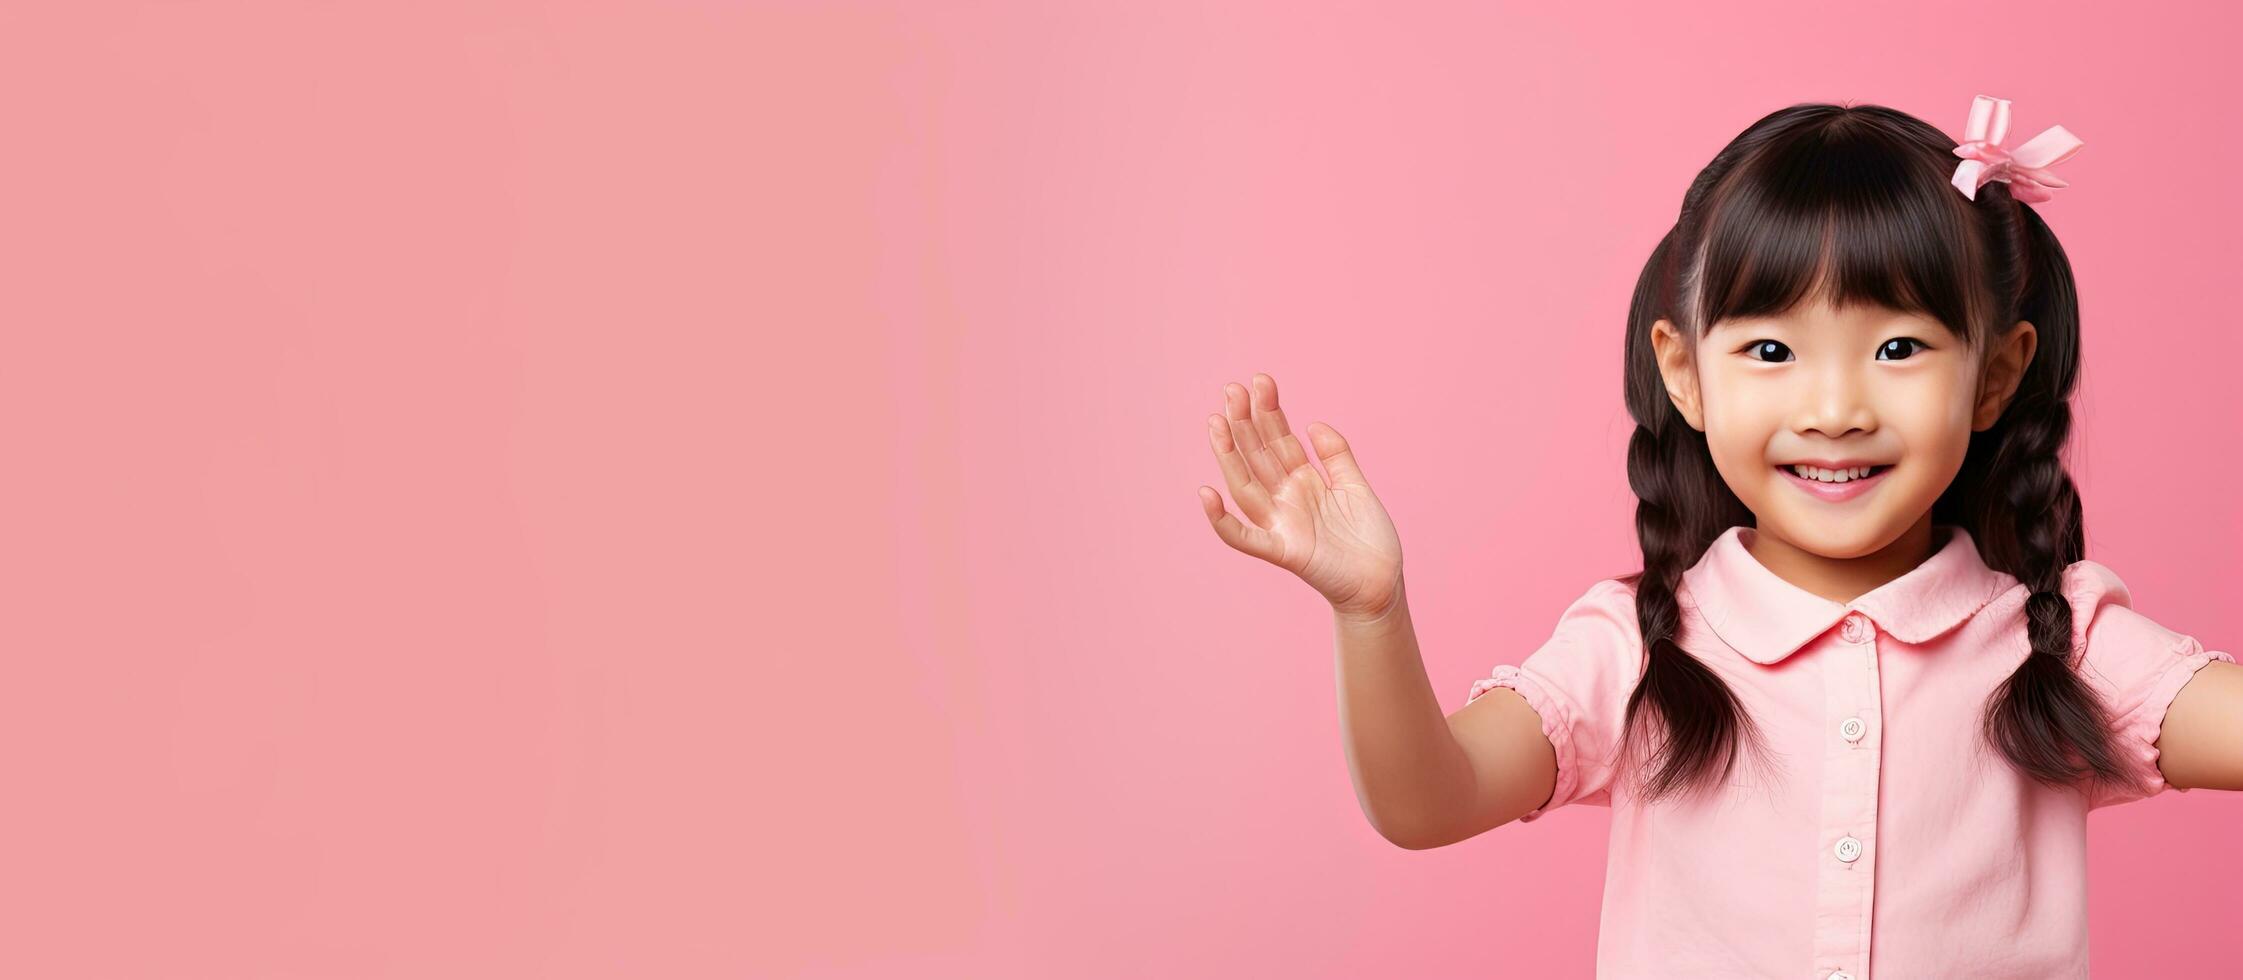 Joyful Asian girl displaying open palm with copy space on a pink background photo